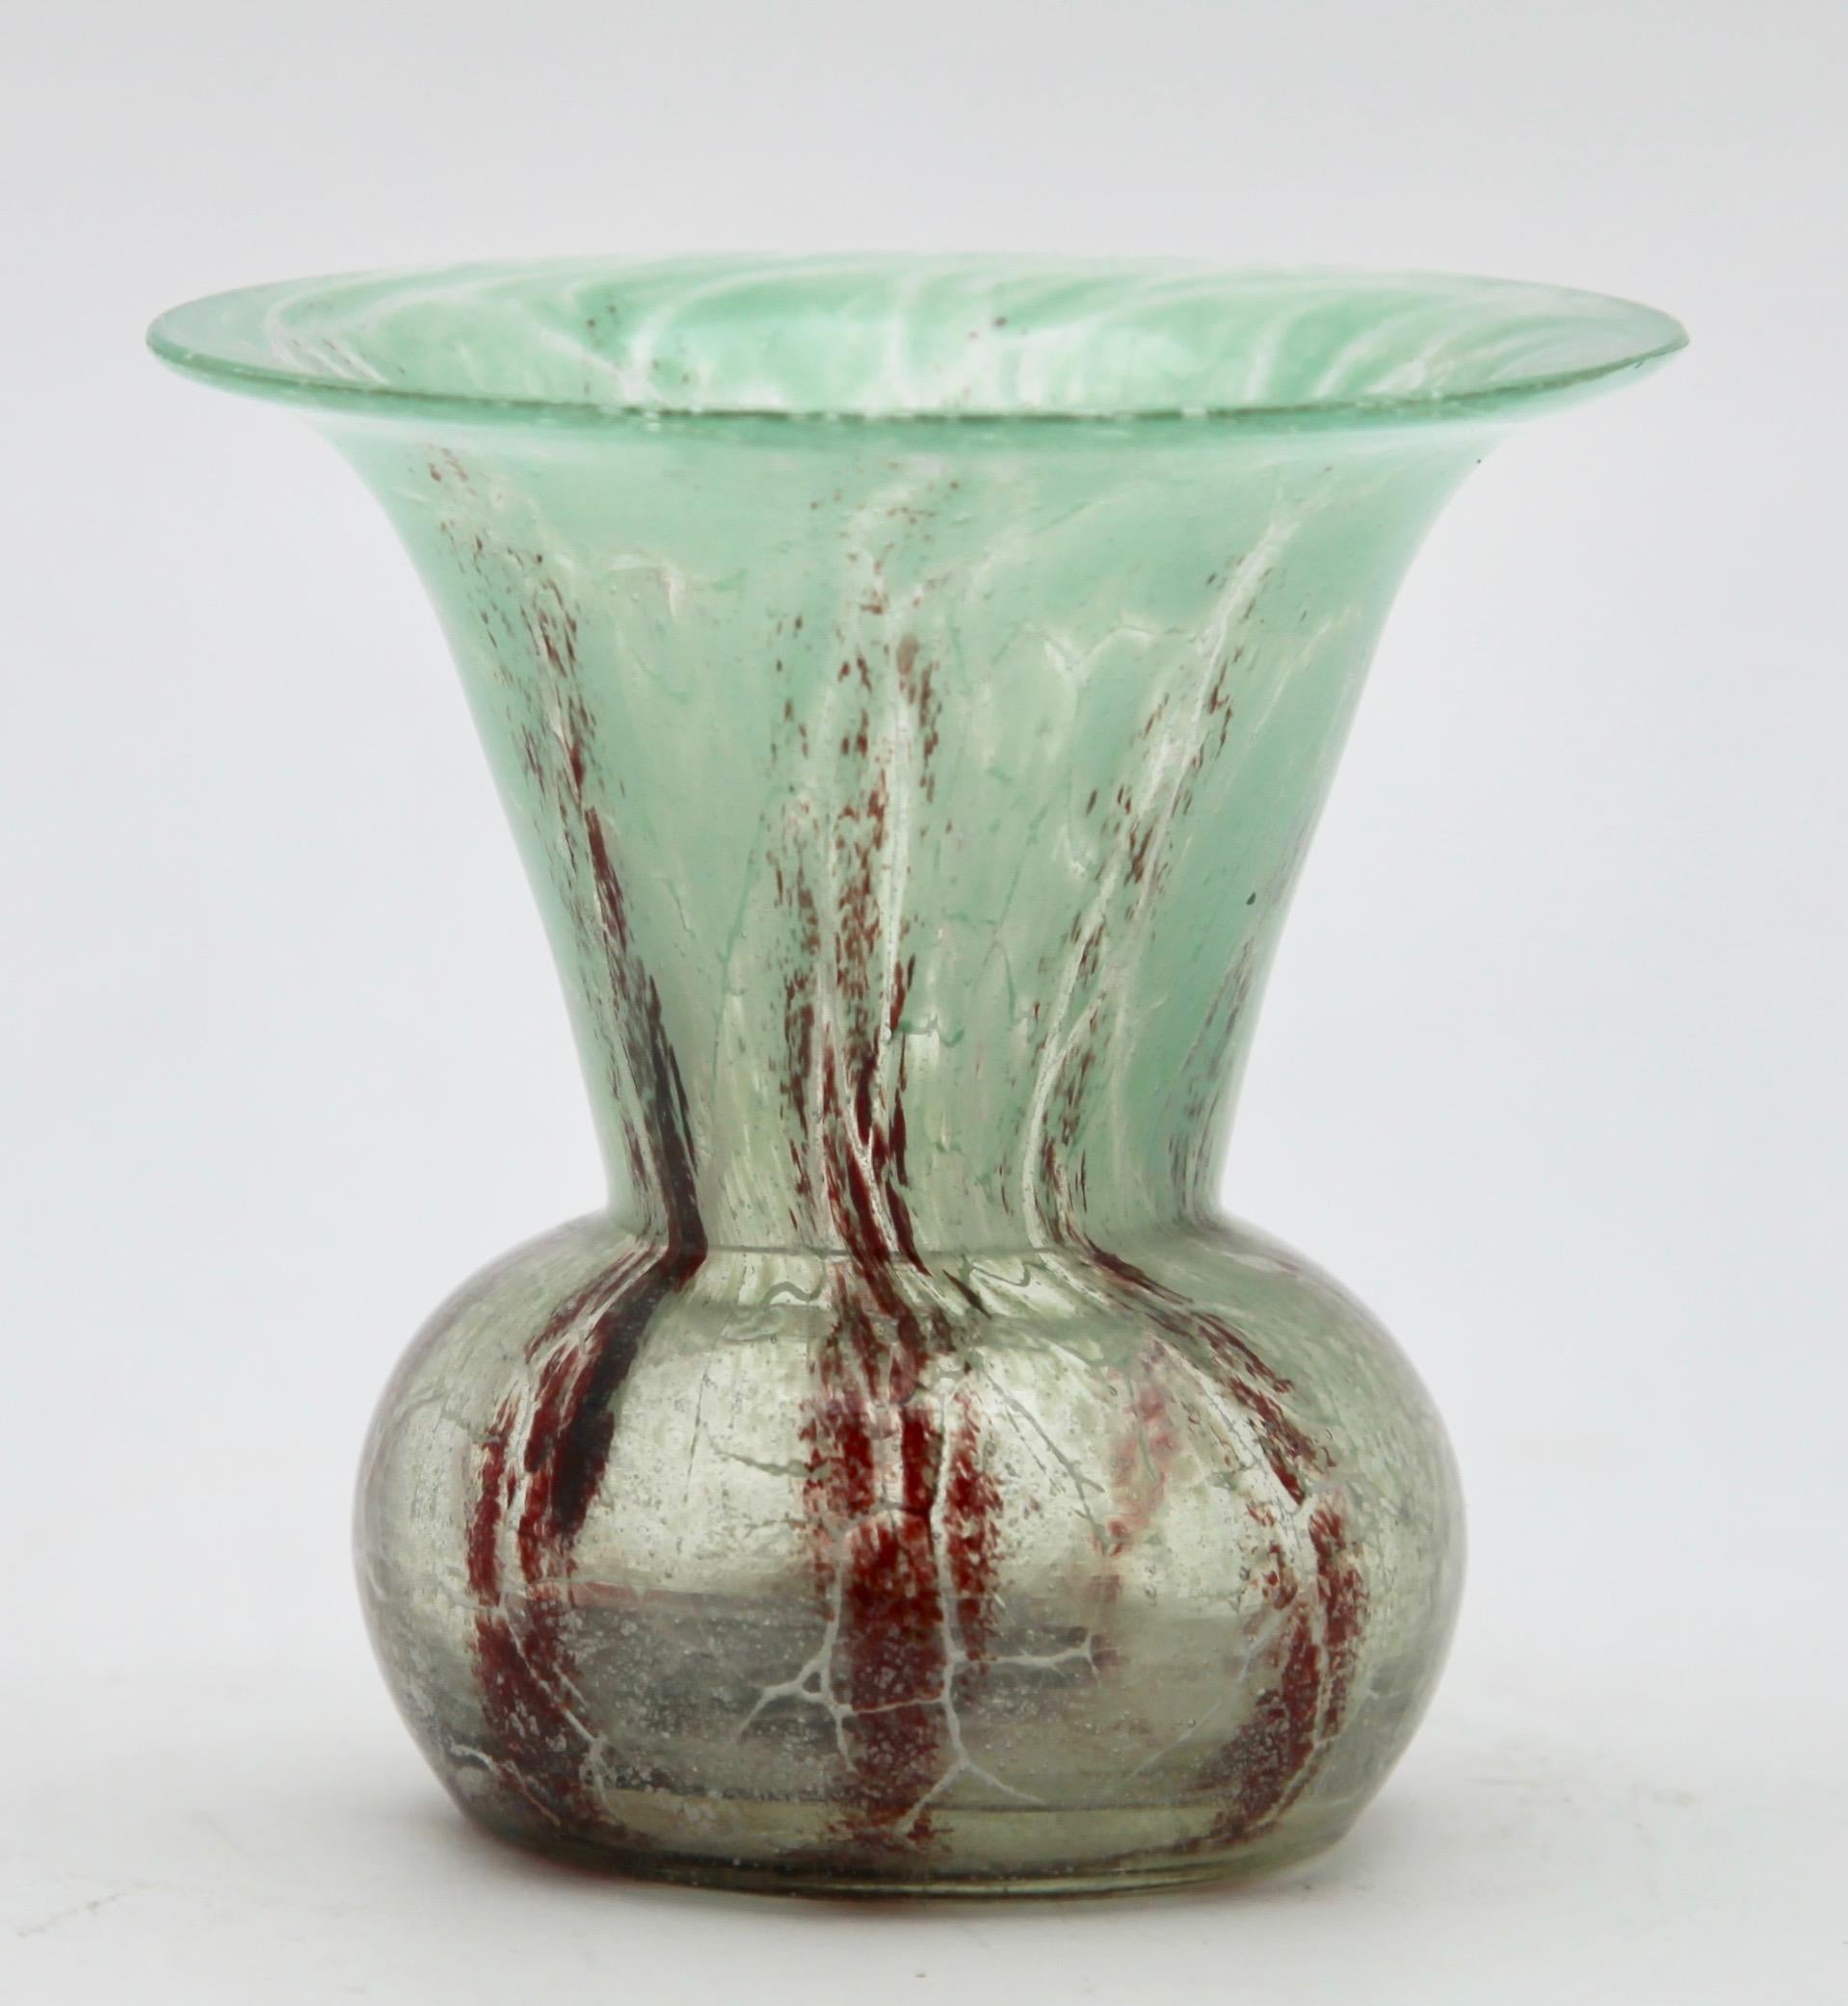 'Ikora' Art Glass Vase, Produced, by WMF in Germany, 1930s by Karl Wiedmann In Good Condition For Sale In Verviers, BE